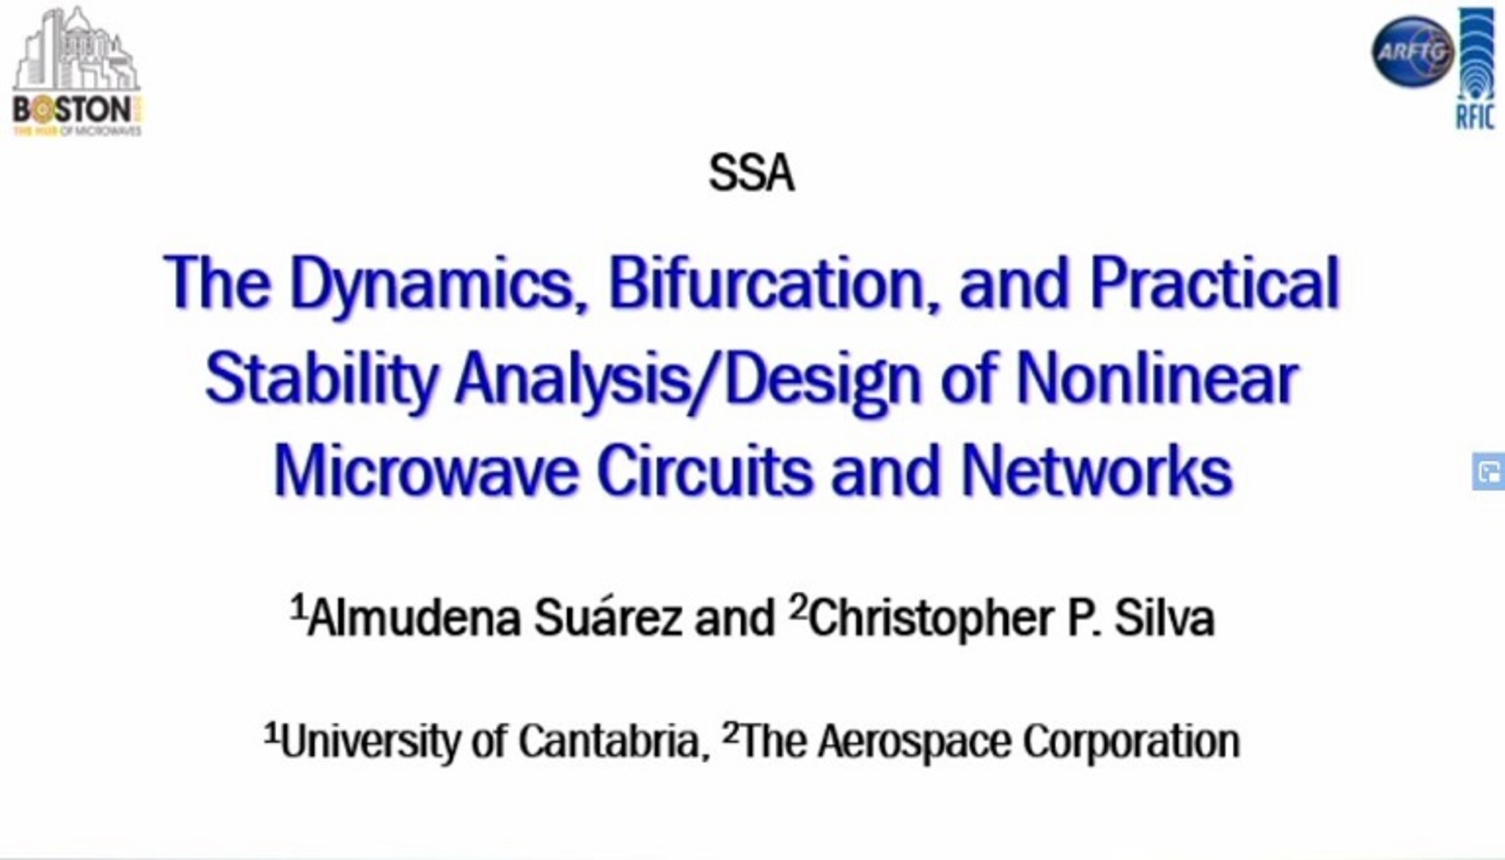 The Dynamics, Bifurcation, and Practical Stability Analysis/Design of Nonlinear Microwave Circuits and Networks Part 1